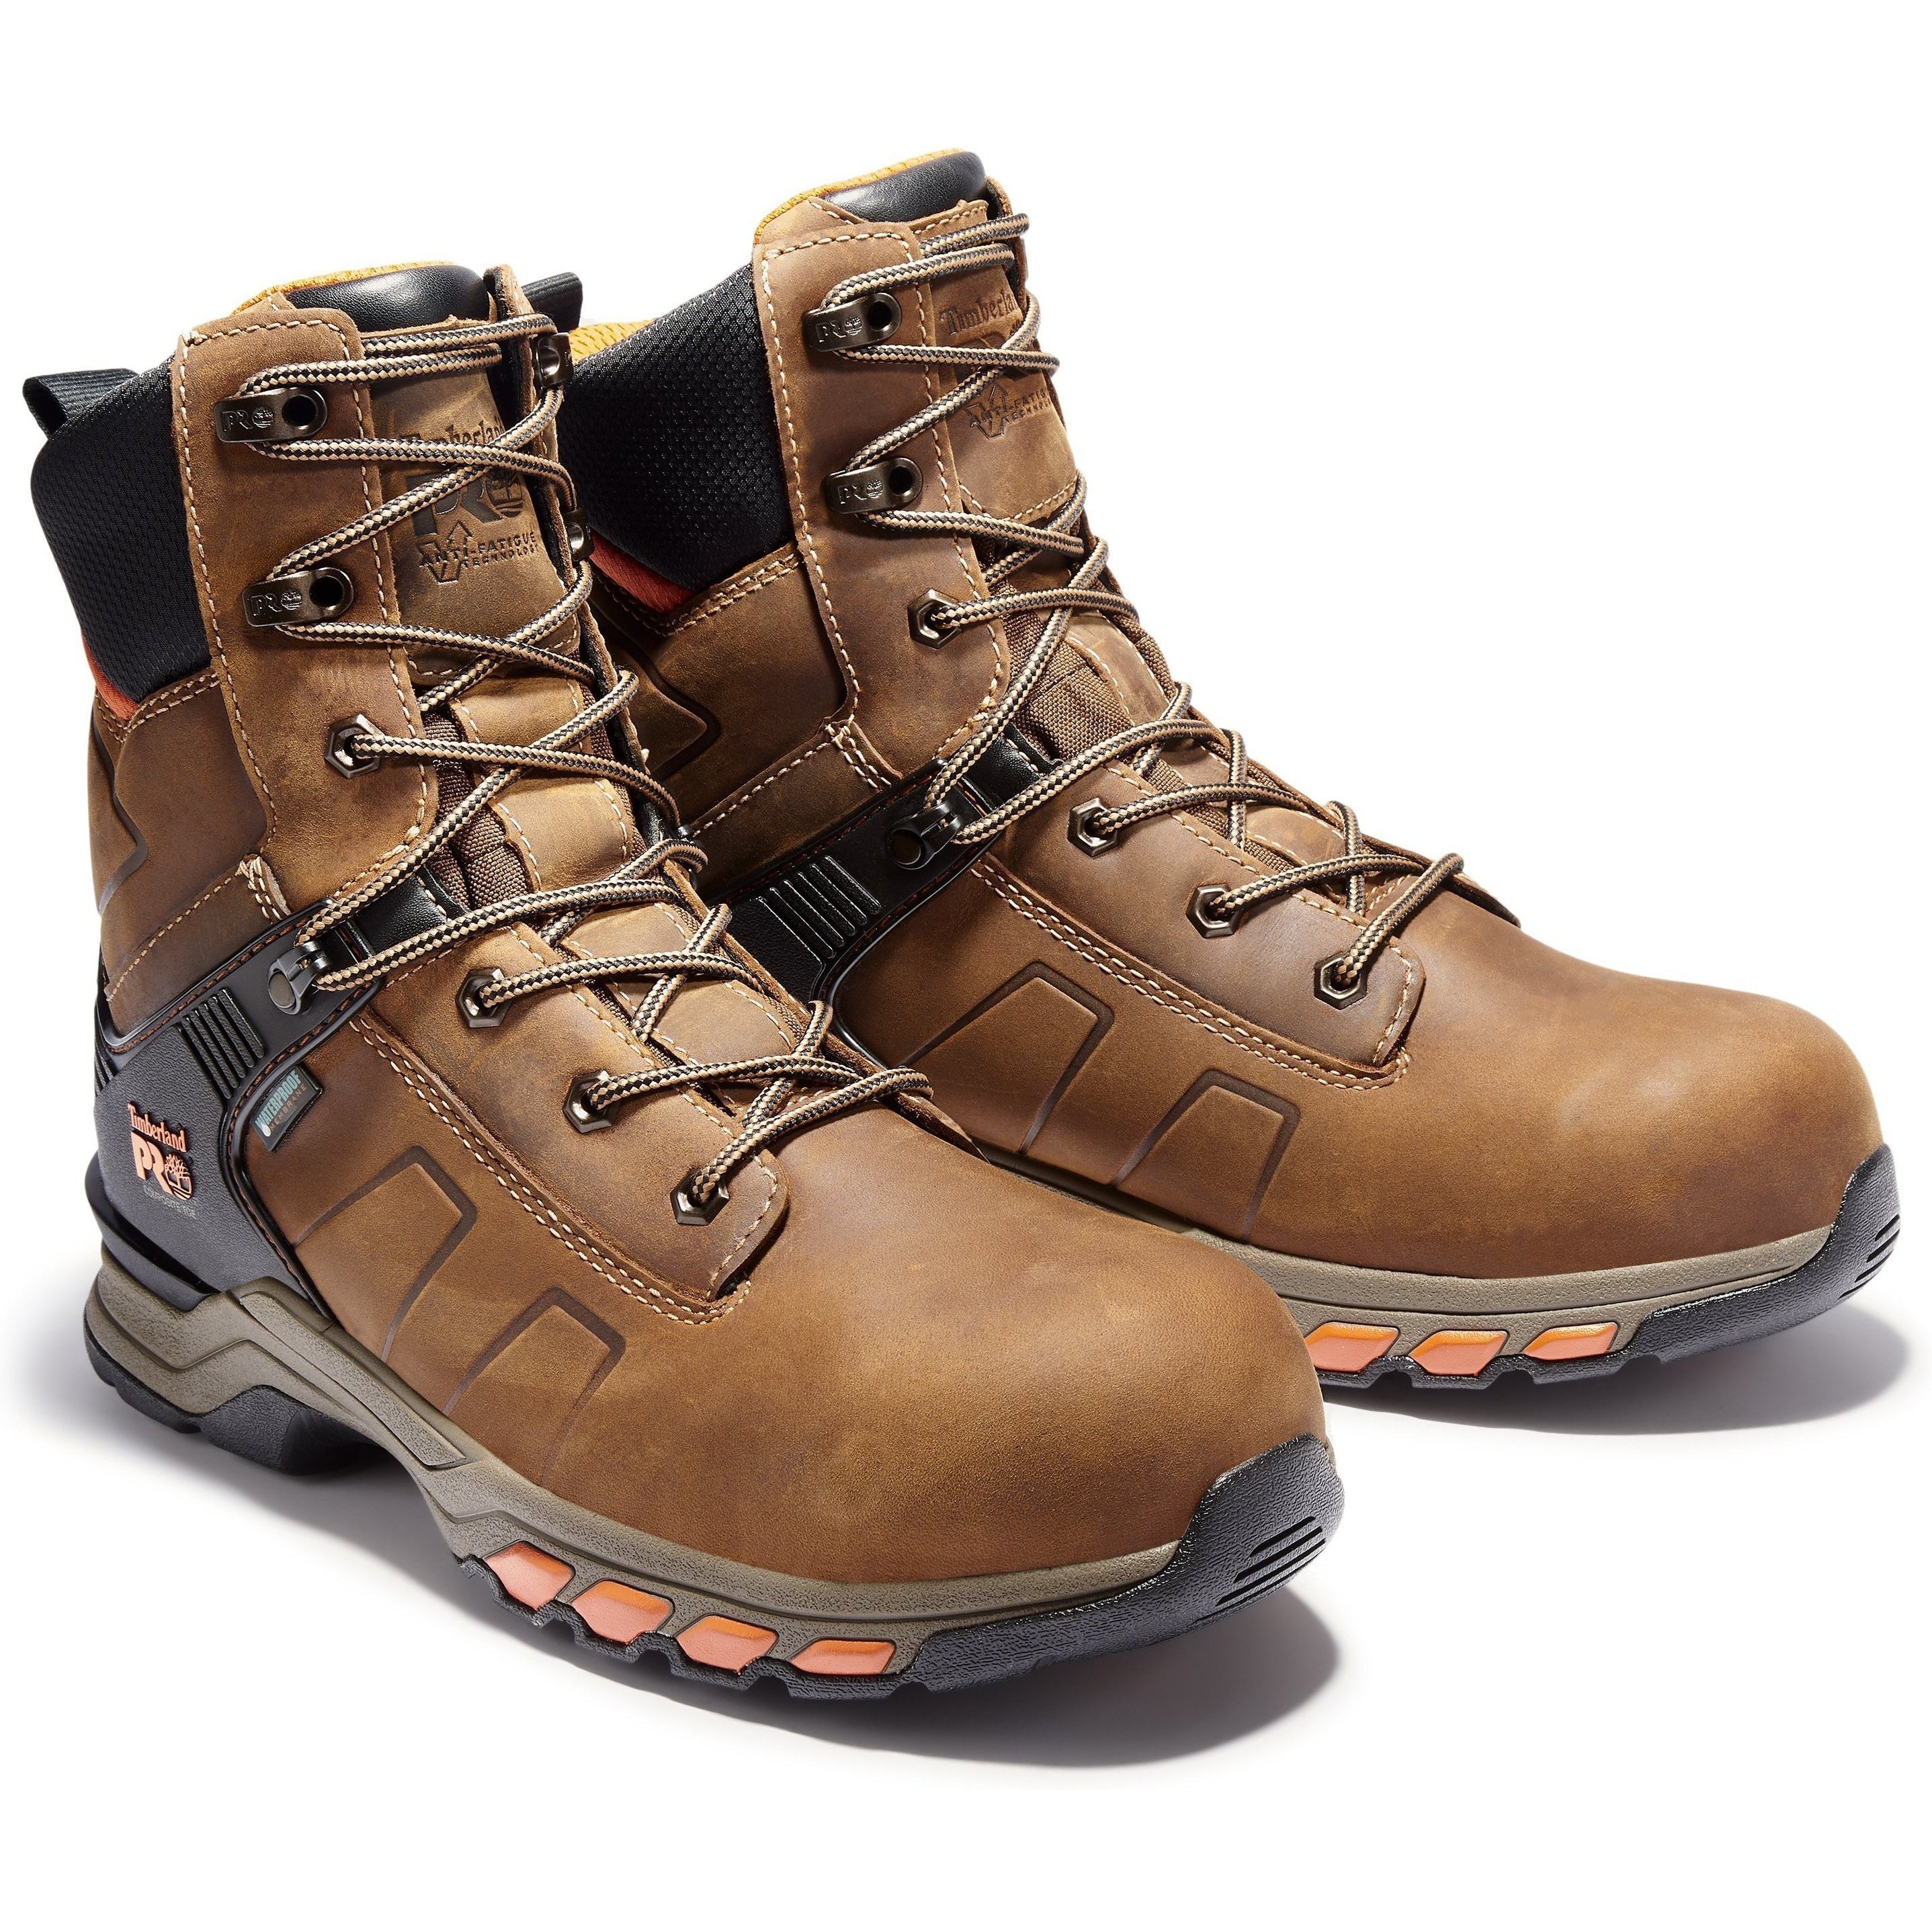 Timberland PRO Men's Hypercharge 8" Comp Toe WP Work Boot - TB1A1KQ2214 8.5 / Medium / Brown - Overlook Boots